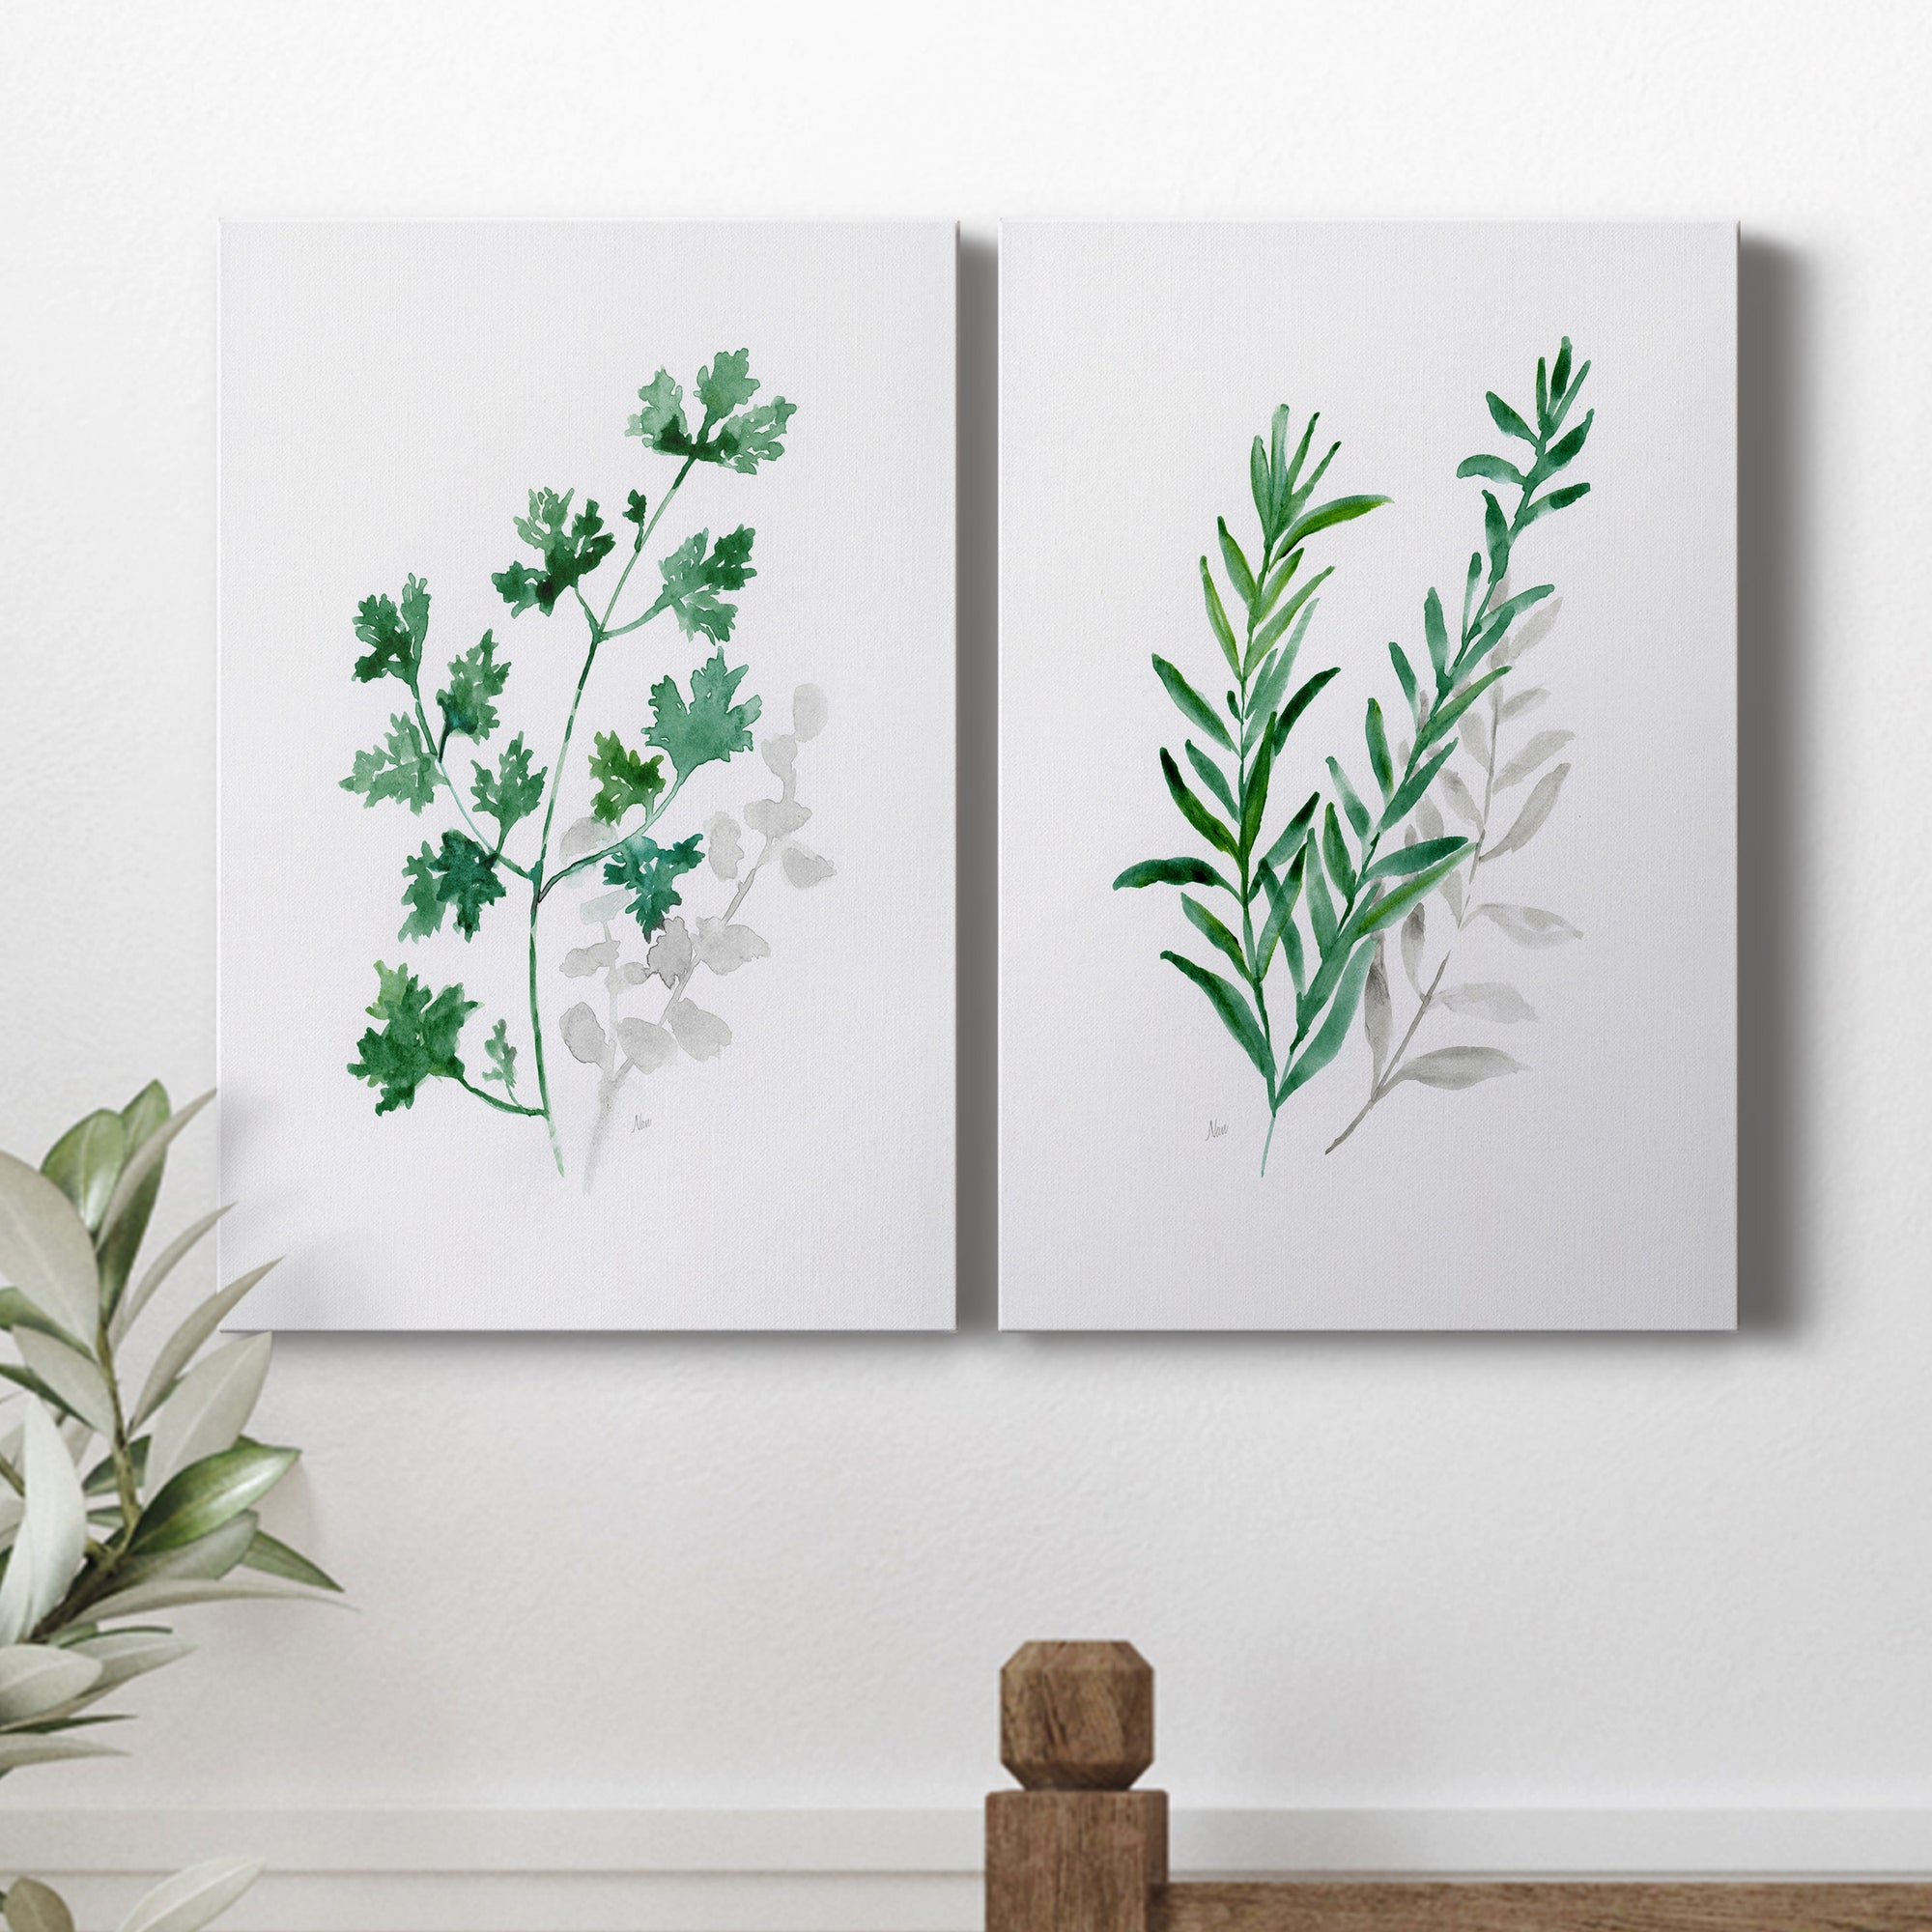 Freshly Picked I Premium Gallery Wrapped Canvas - Ready to Hang - Set of 2 - 8 x 12 Each